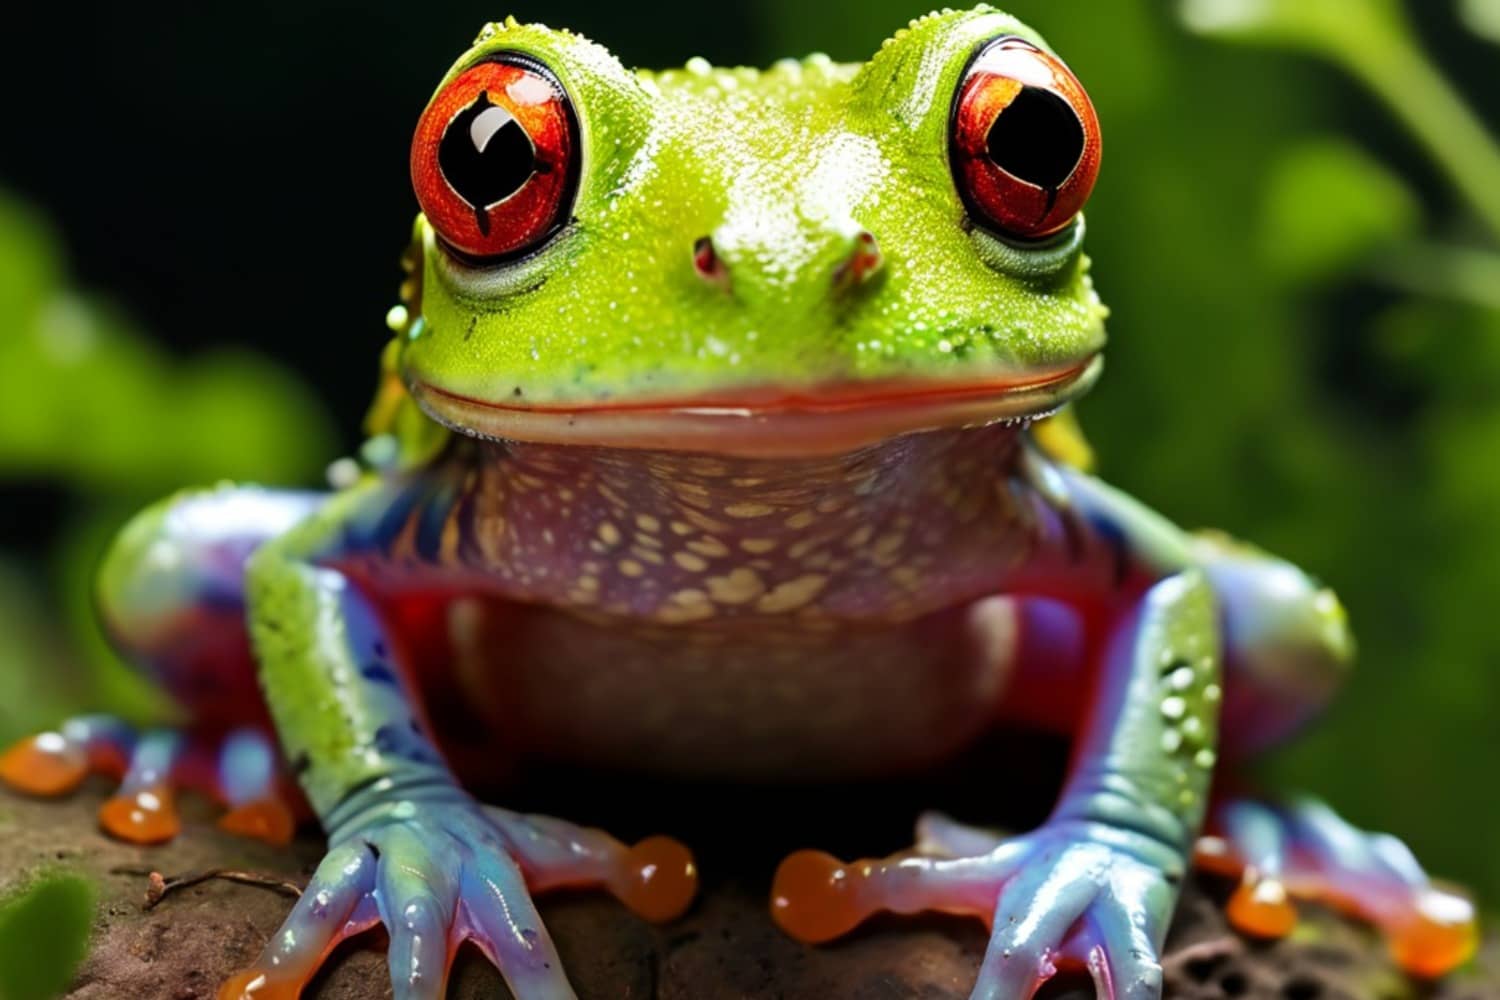 Kermit the Frog Inspires Name of New Ancient Amphibian Species